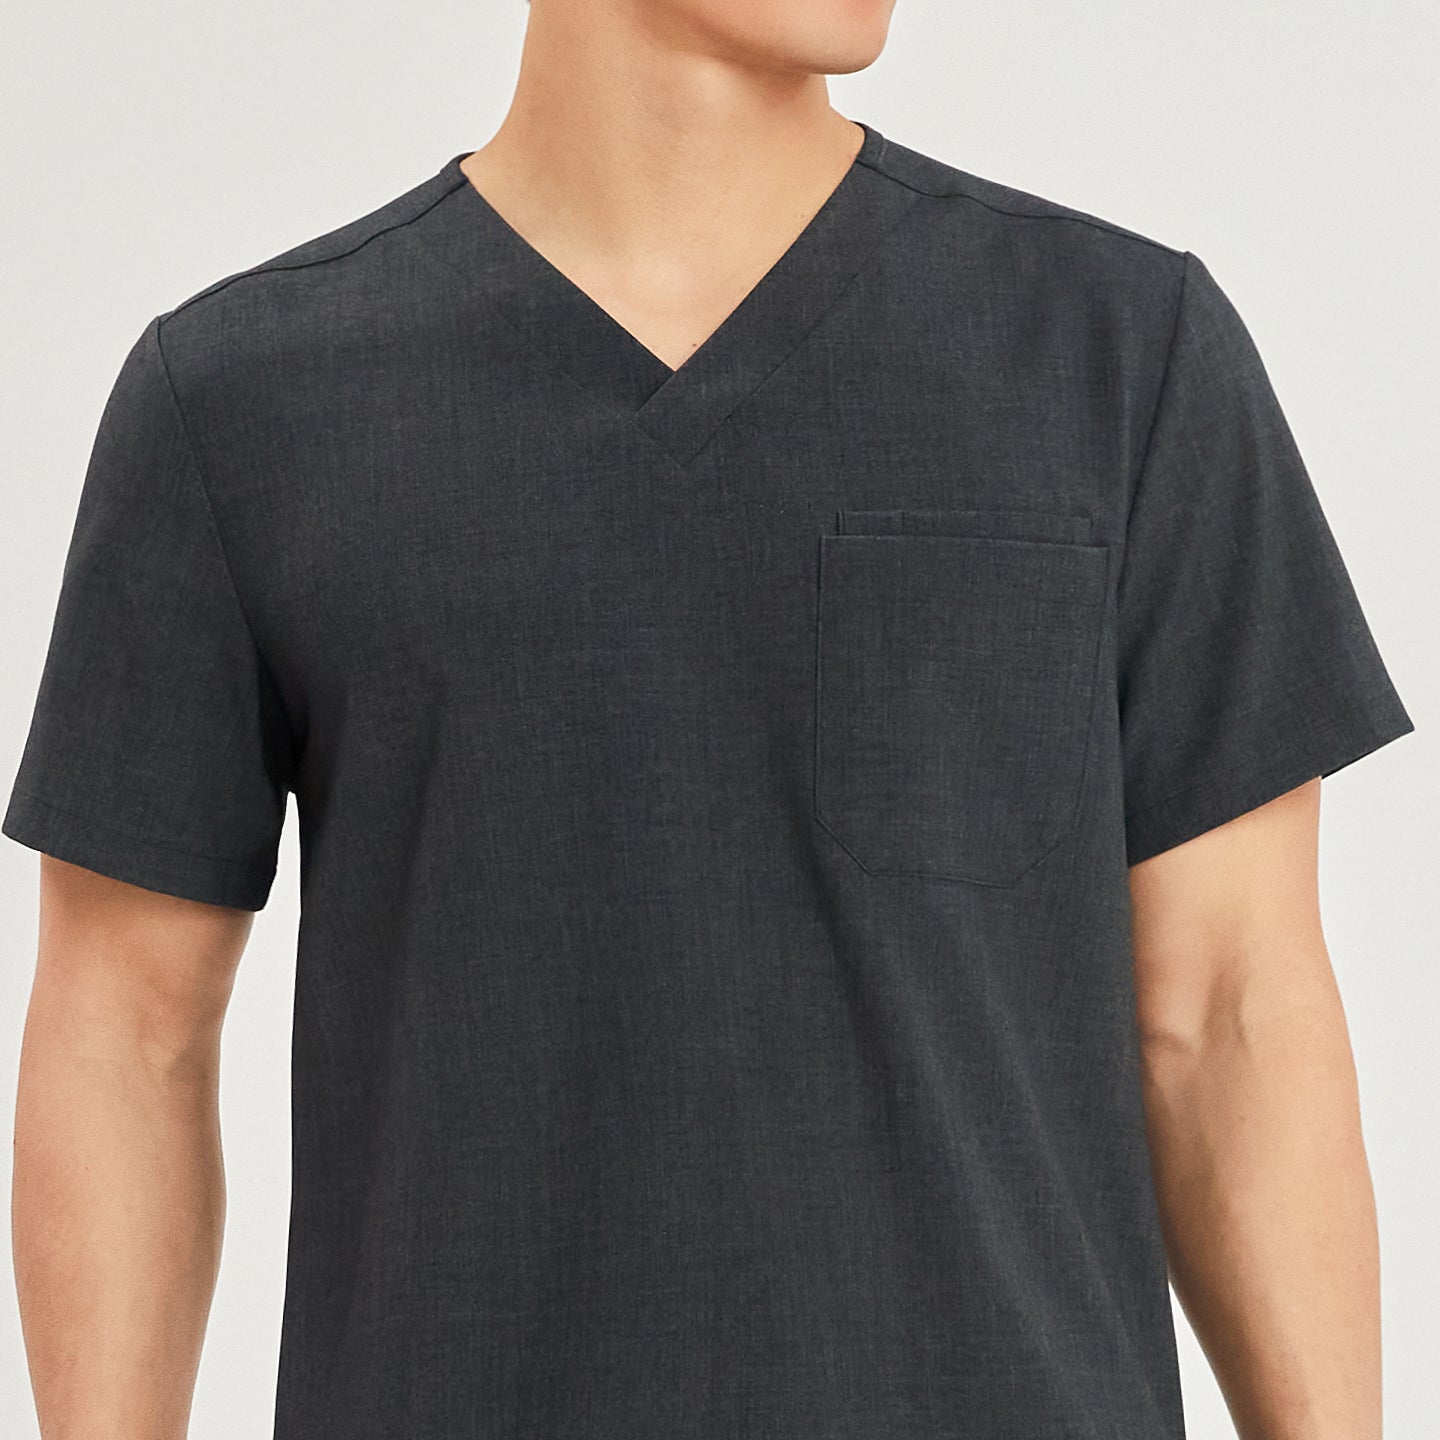 Close-up view of a male model wearing a charcoal gray scrub top with a V-neck and a single chest pocket. The focus is on the upper body and the pocket detail, Charcoal Gray